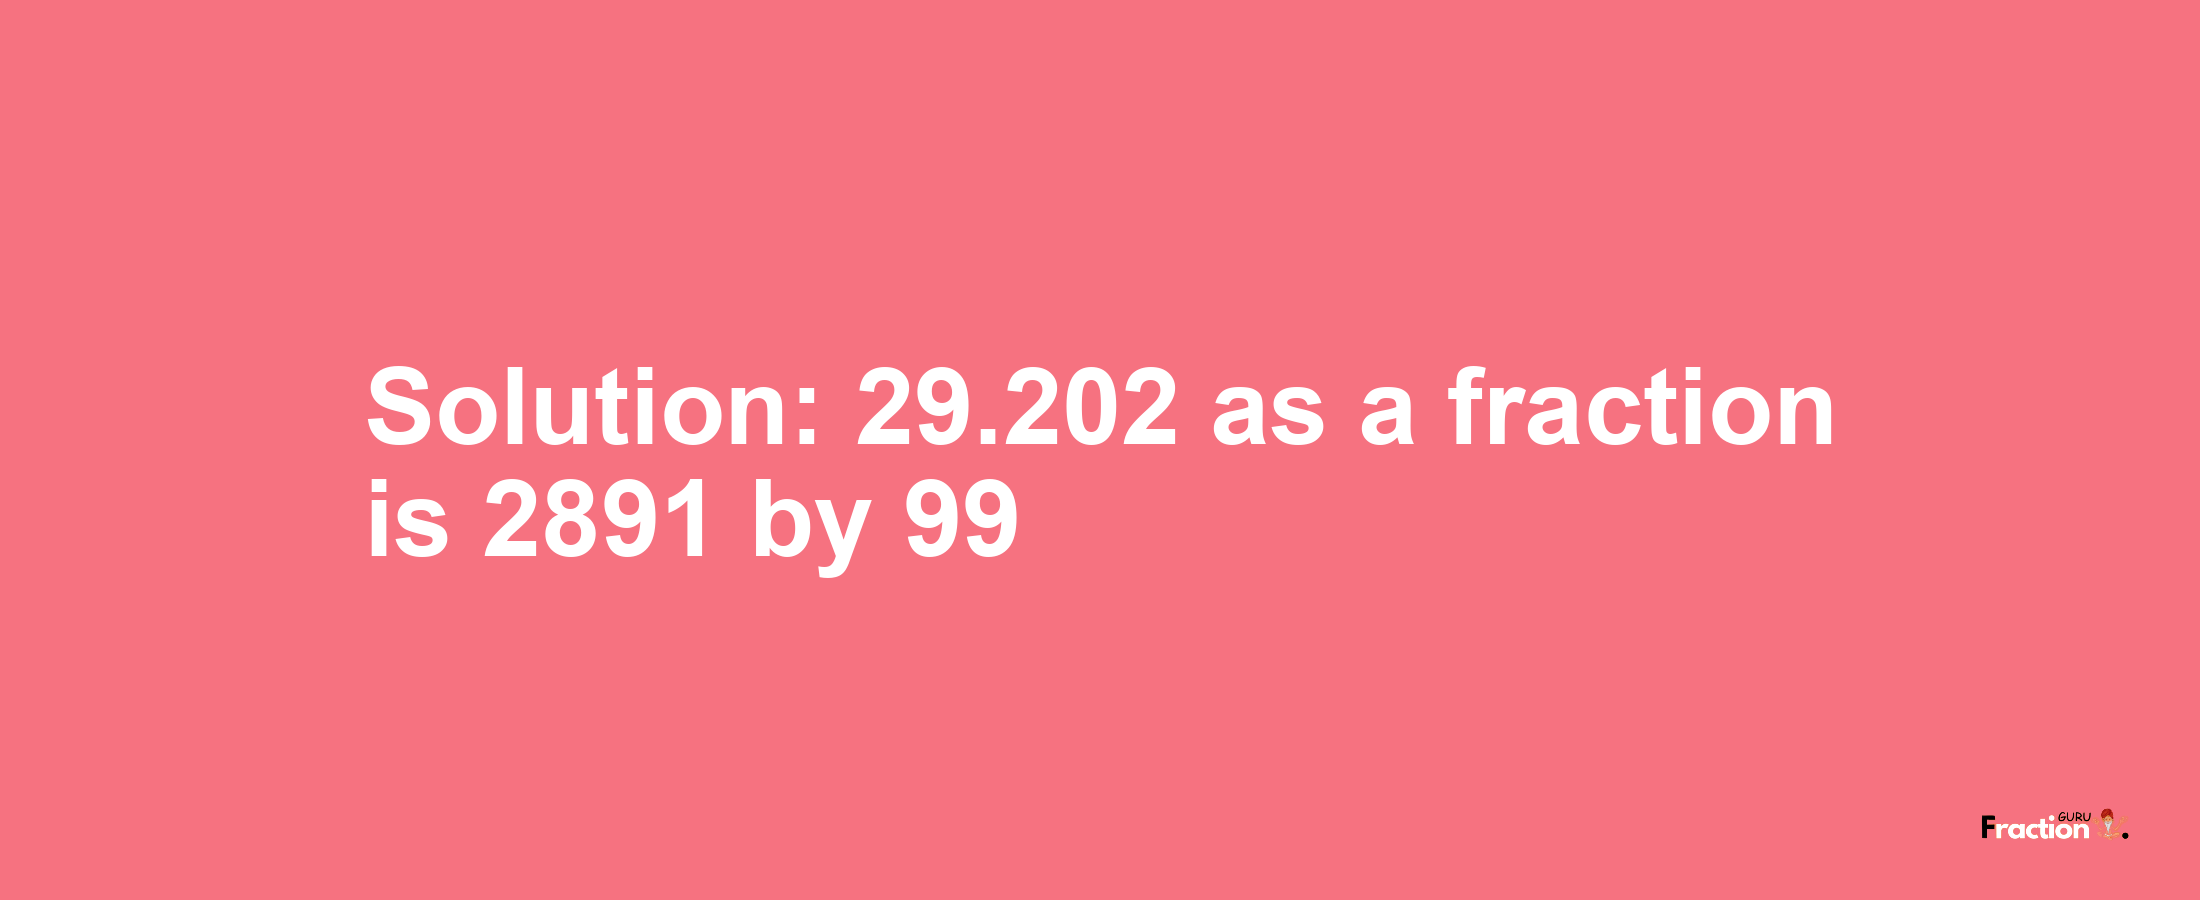 Solution:29.202 as a fraction is 2891/99